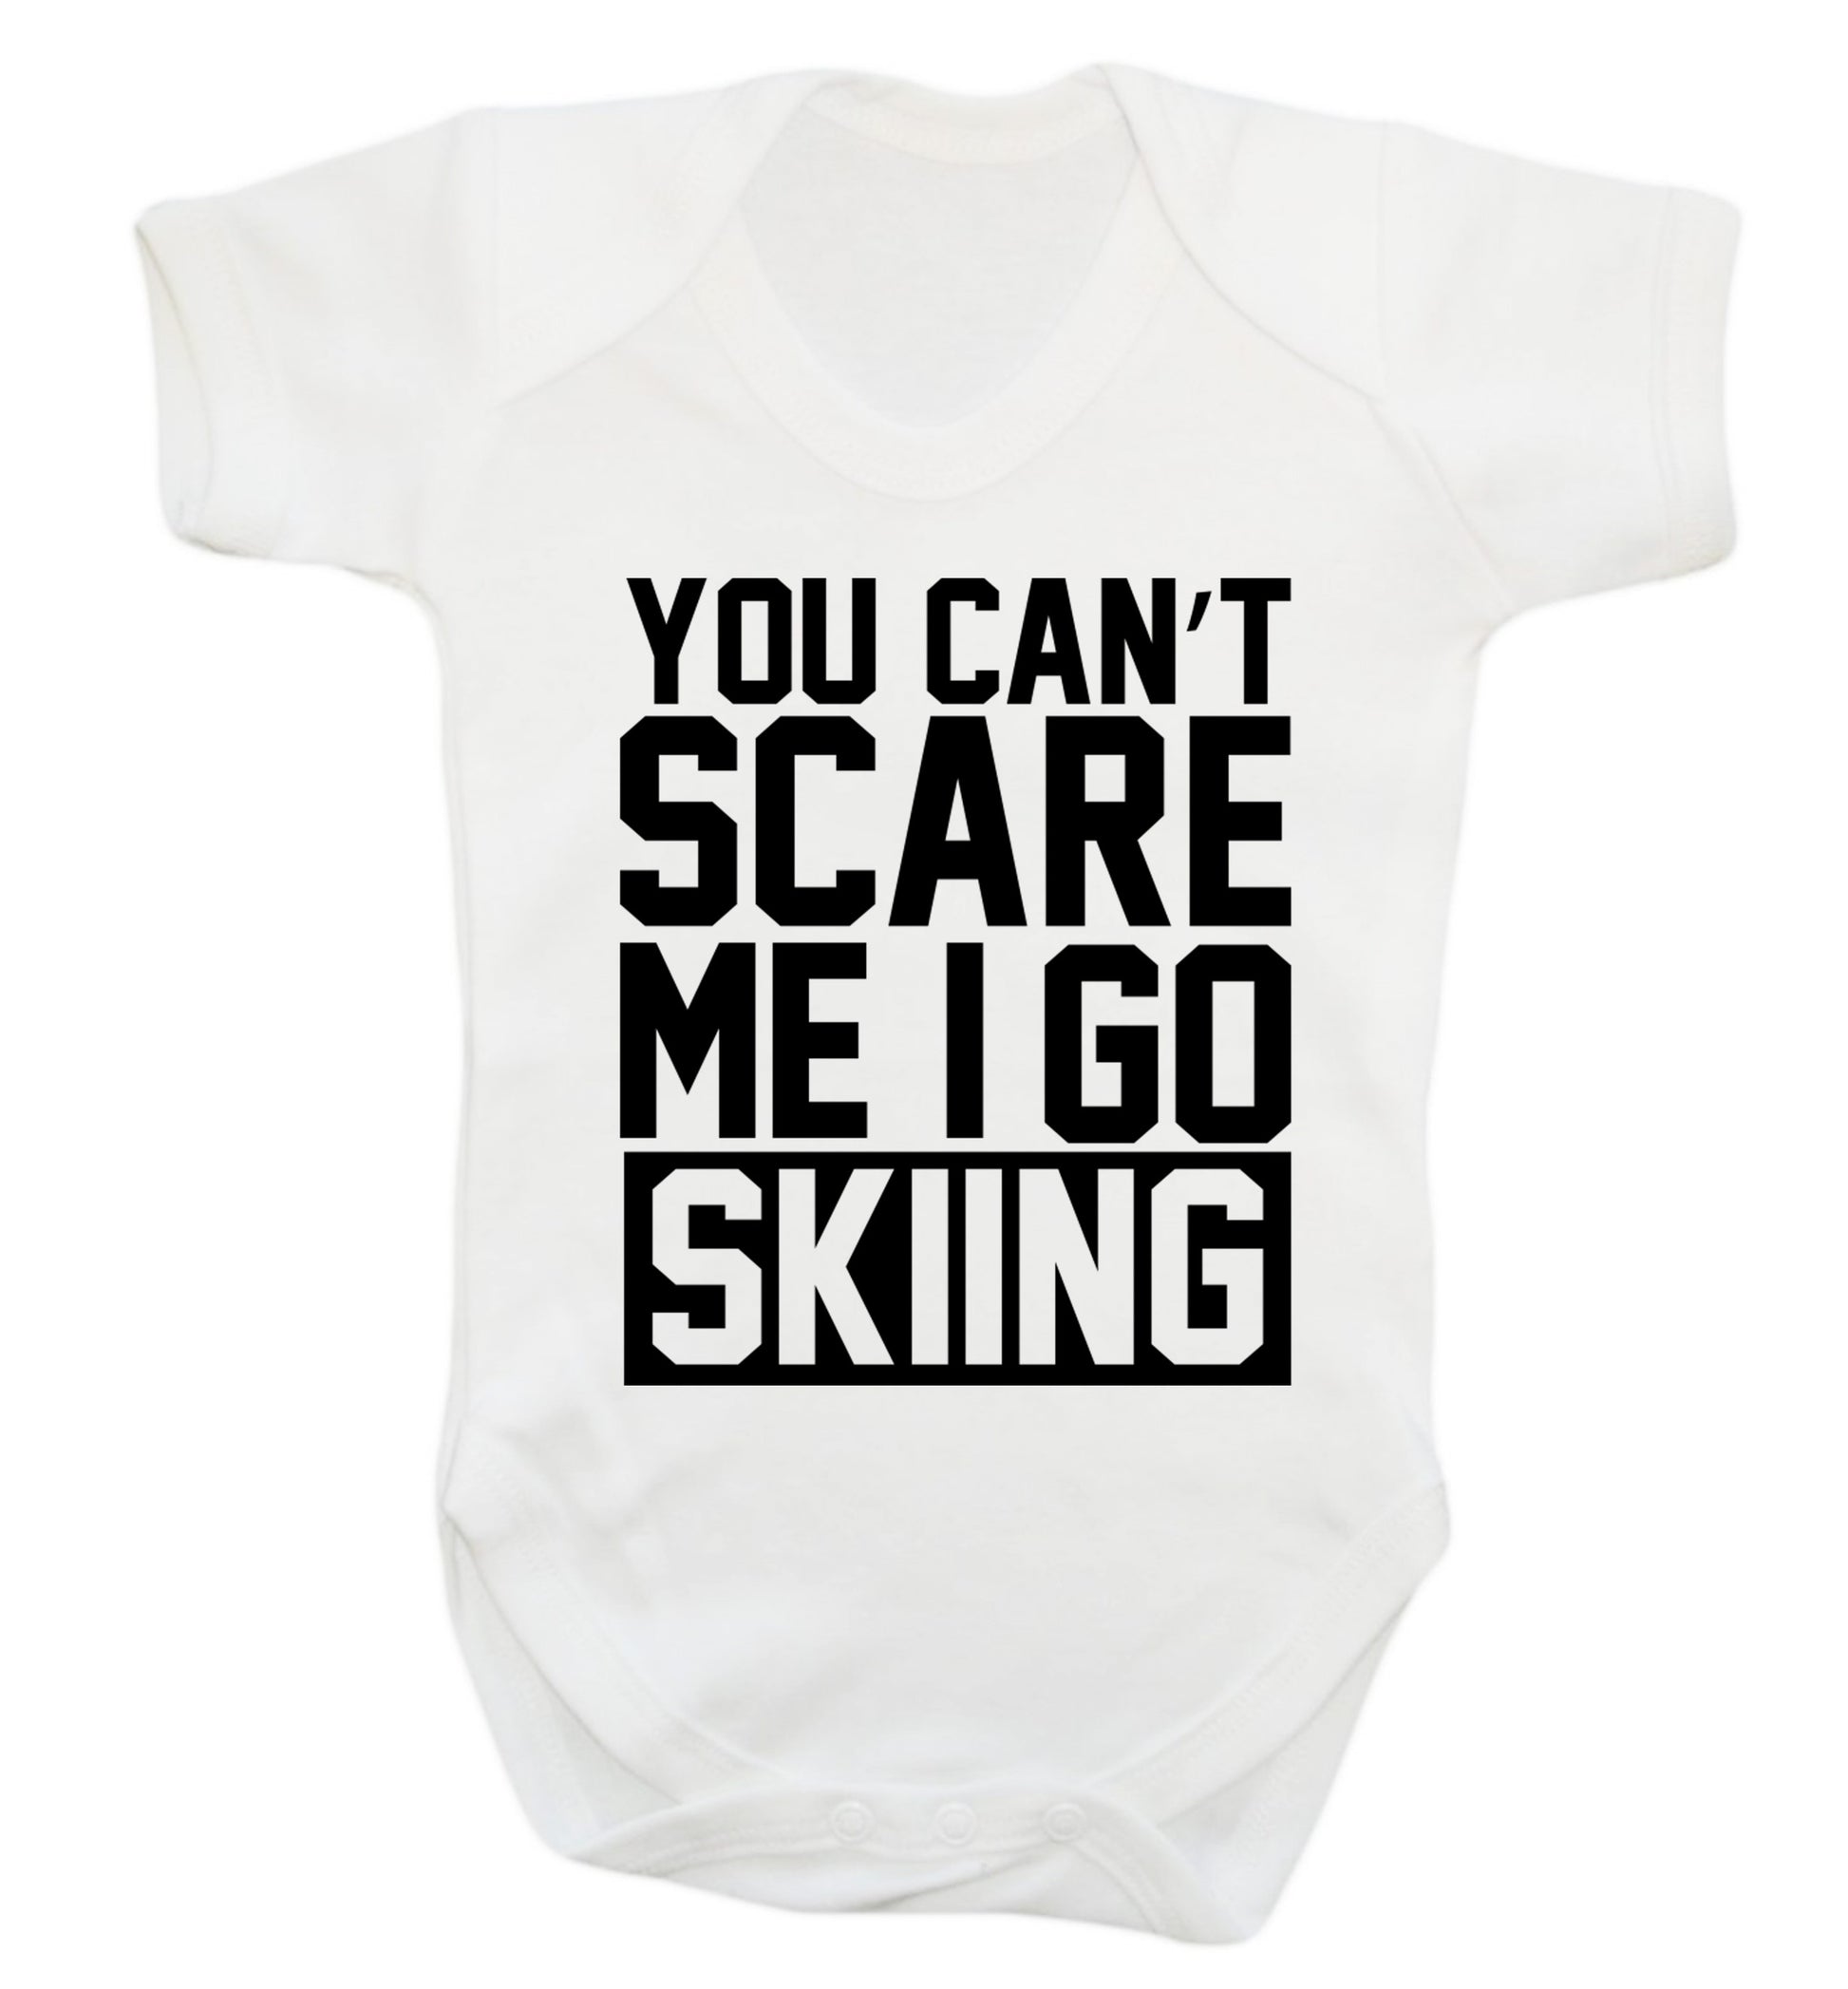 You can't scare me I go skiing Baby Vest white 18-24 months